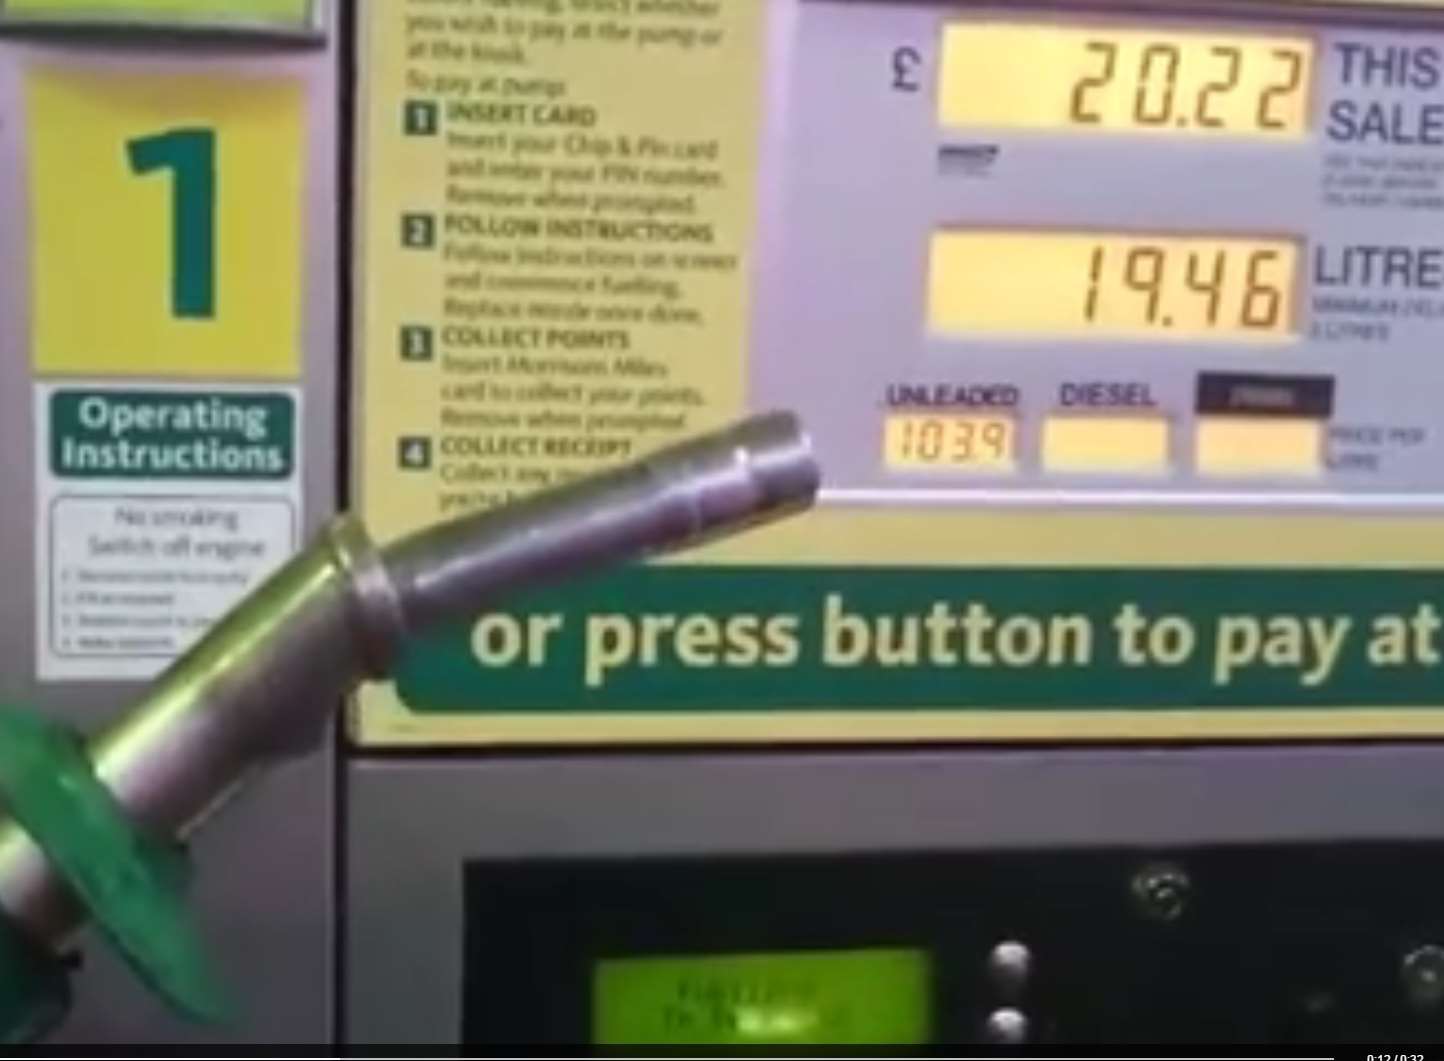 The pump is seen charging without dispensing petrol